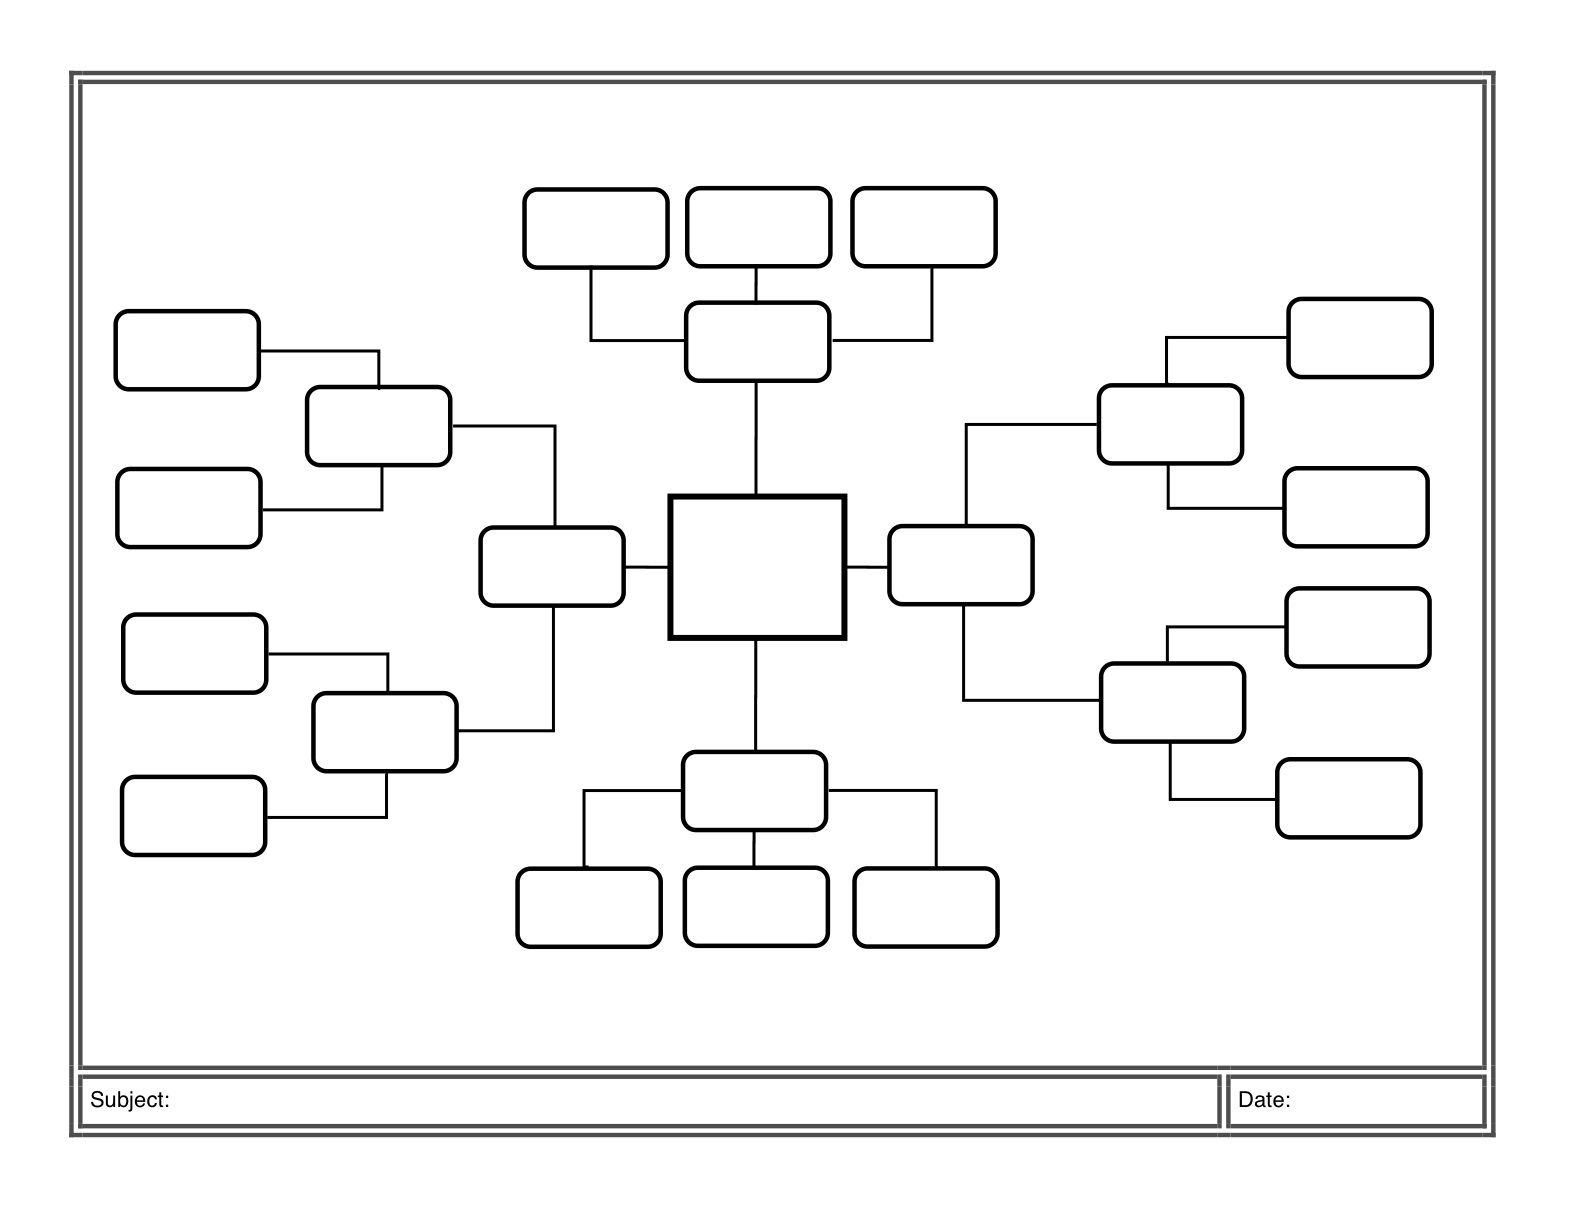 Mind Map Templete In Black And White: Main Item, Secondary Items - Printable Concept Map